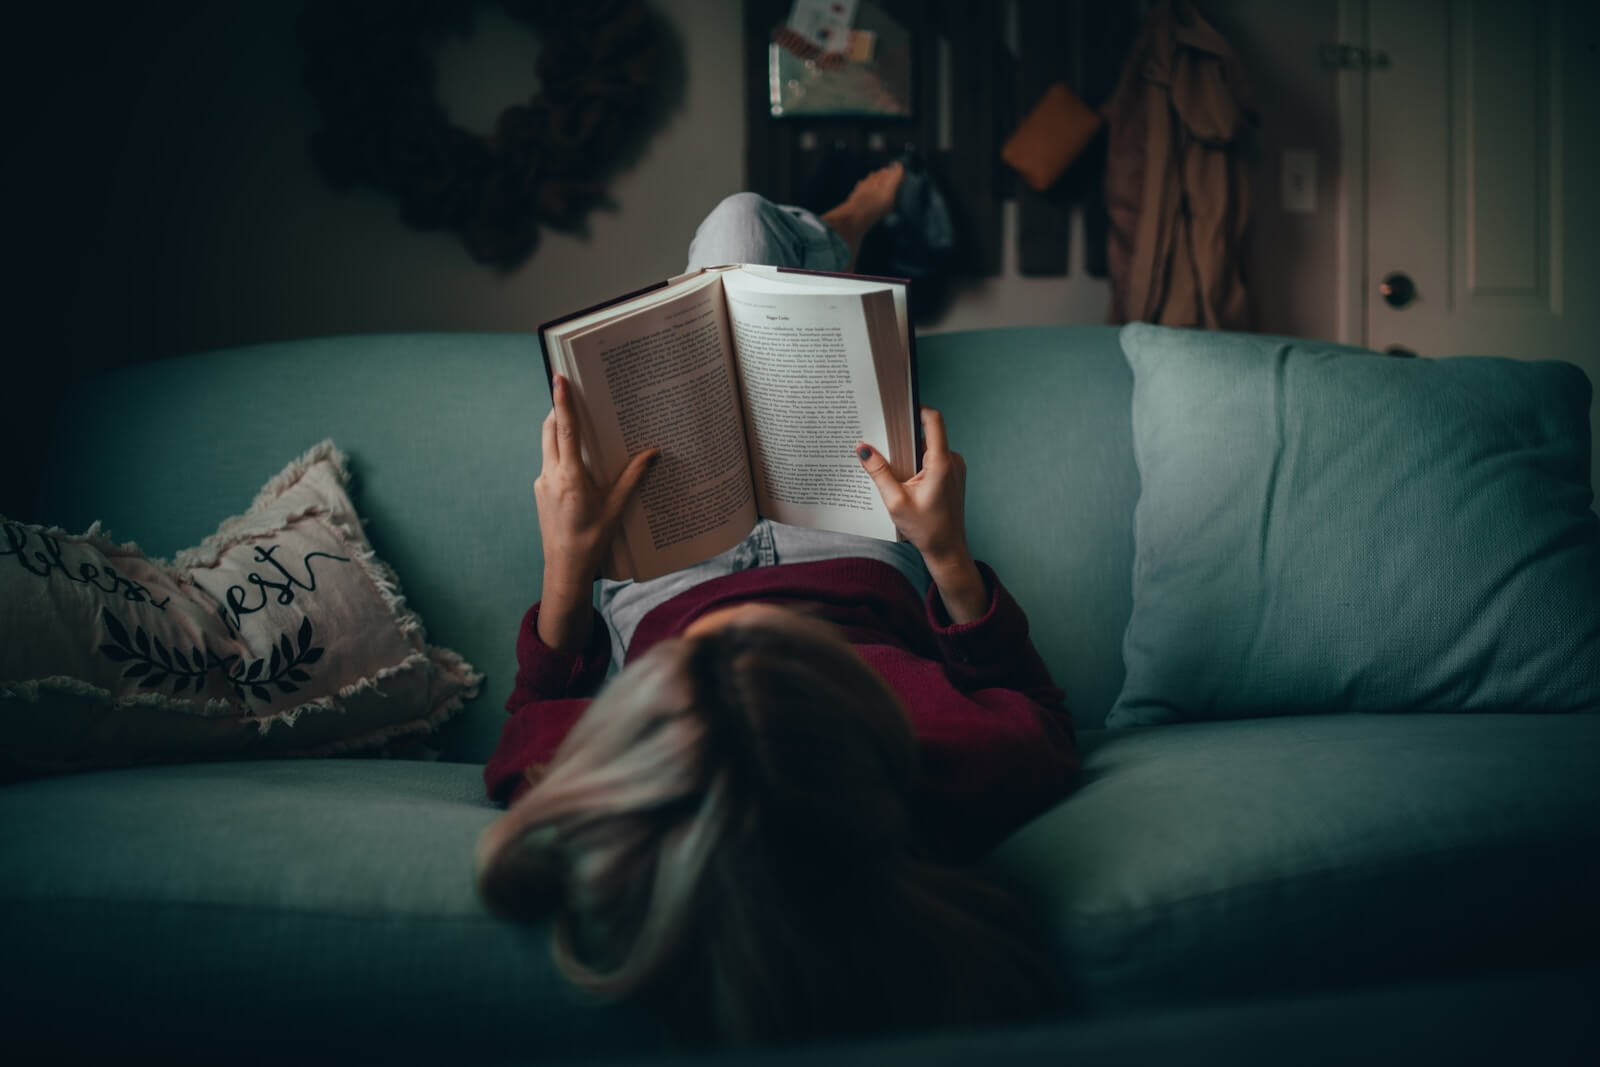 woman in red shirt reading book photo by Matias North on Unsplash